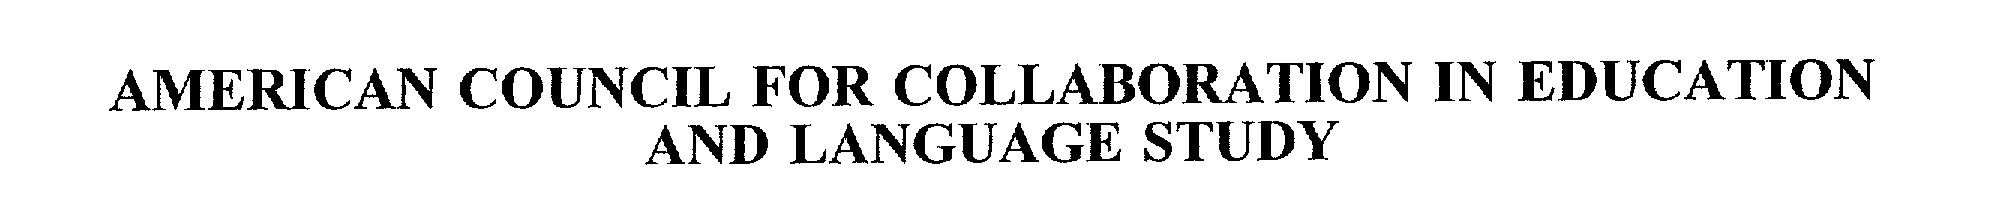  AMERICAN COUNCIL FOR COLLABORATION IN EDUCATION AND LANGUAGE STUDY